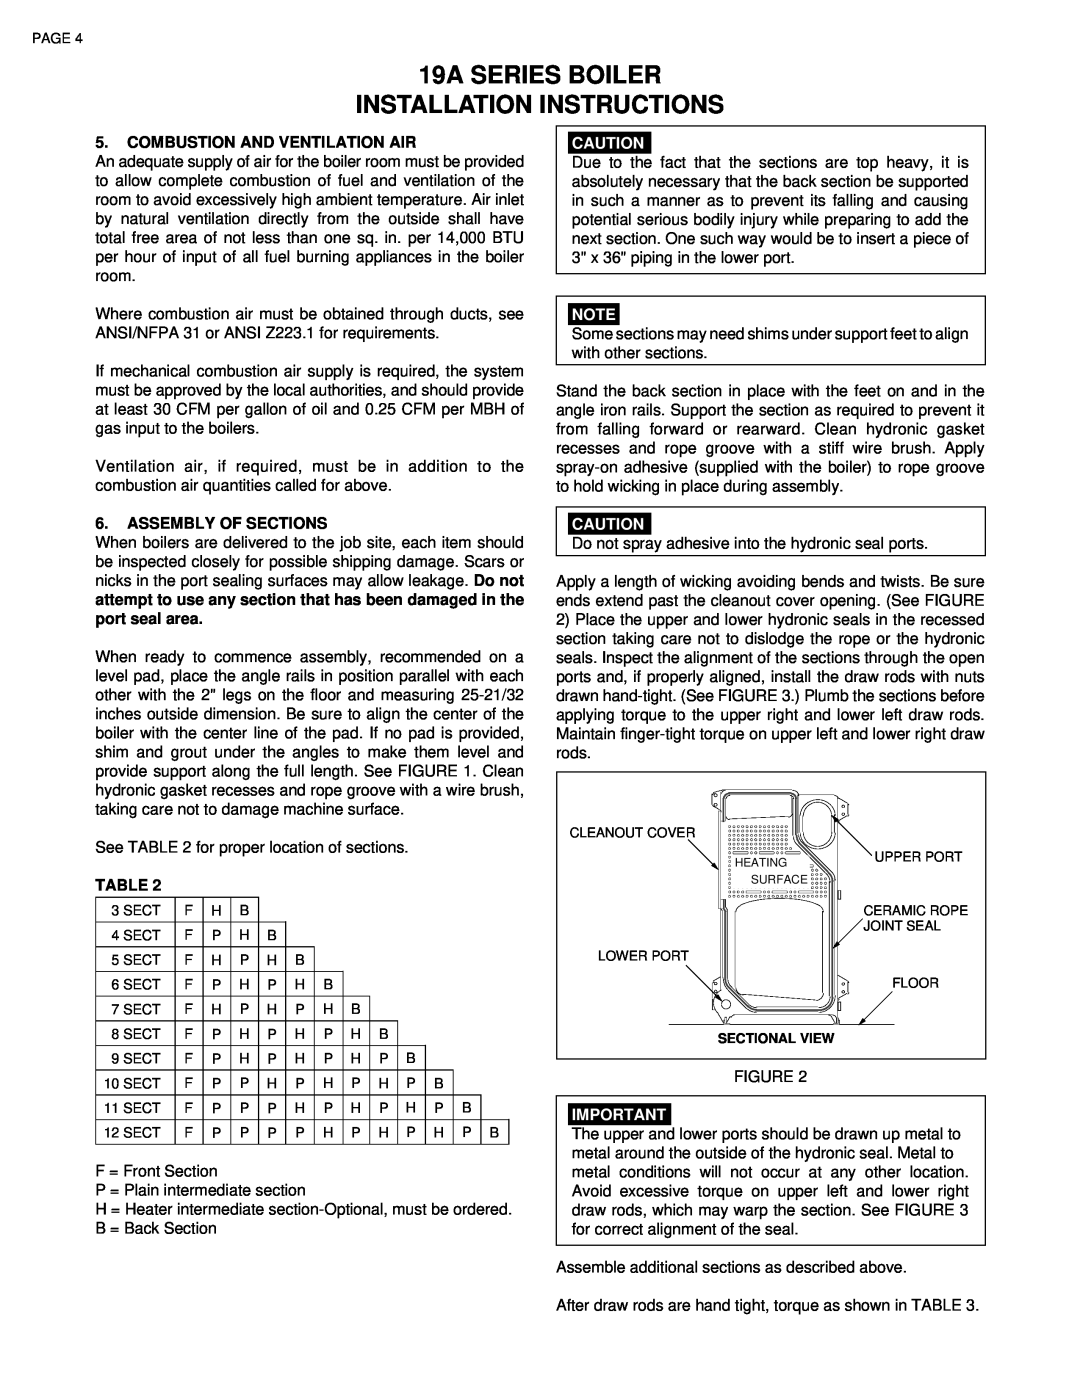 Smith Cast Iron Boilers 19A SERIES BOILER INSTALLATION INSTRUCTIONS, Combustion And Ventilation Air 